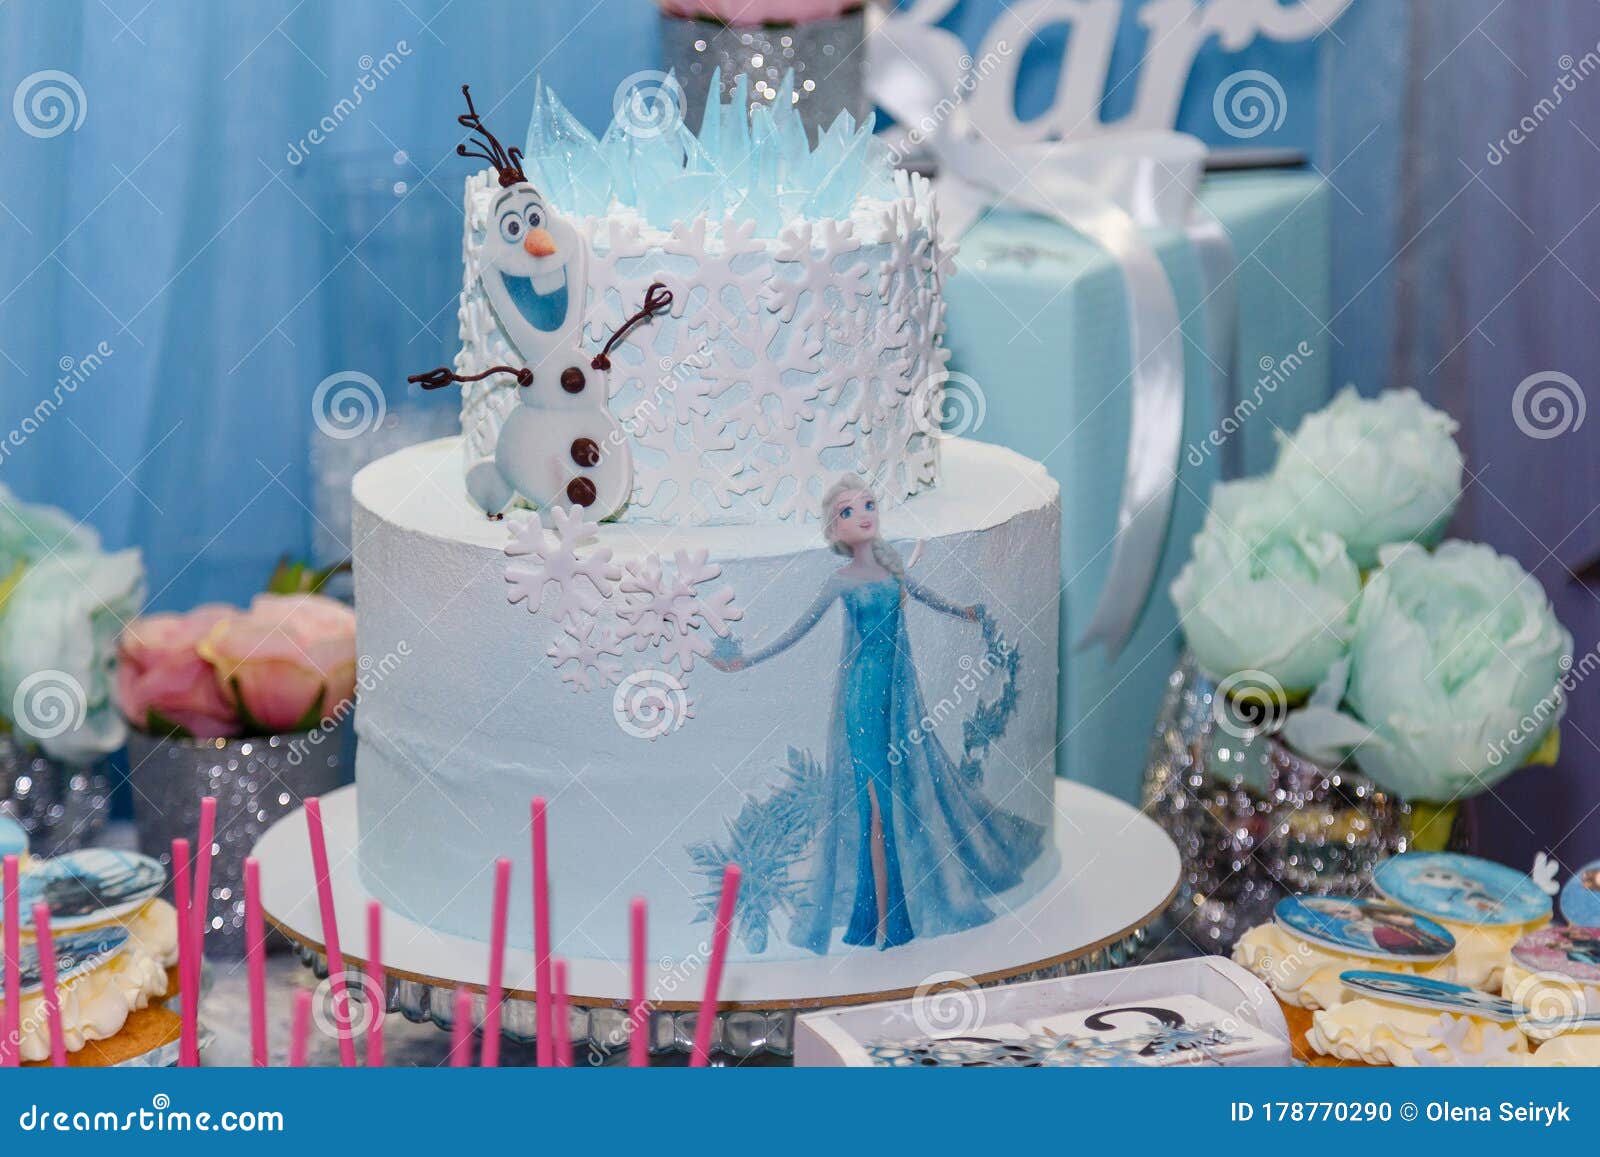 Candy Bar, Birthday Cake for a Girl with Frozen Cartoon Character ...